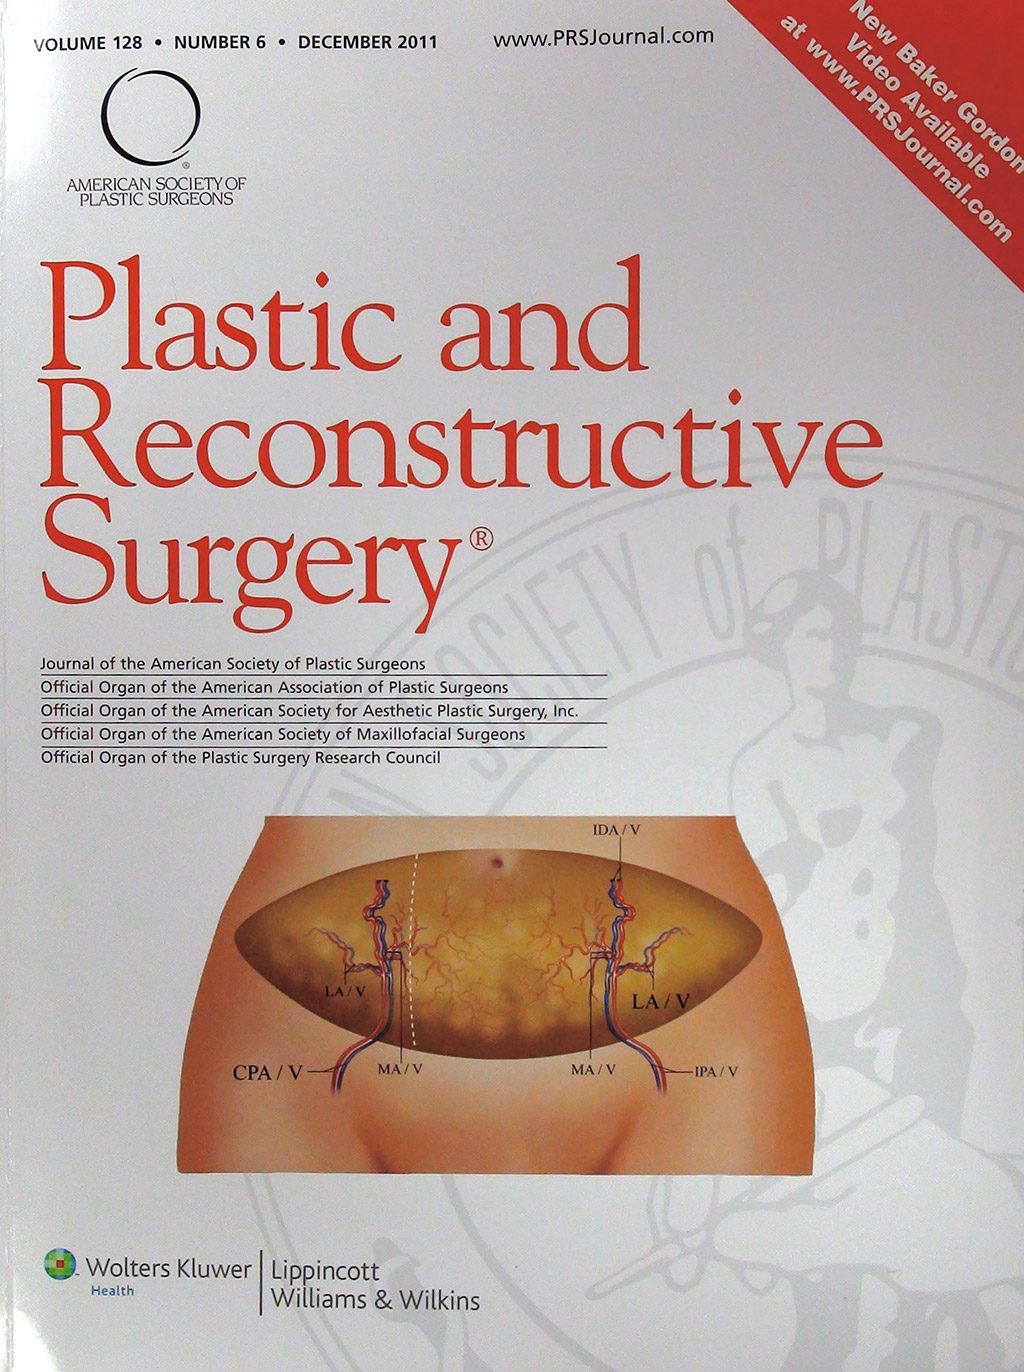 Simultaneous scarless contralateral breast augmentation during unilateral breast reconstruction using bilateral differentially split DIEP flaps